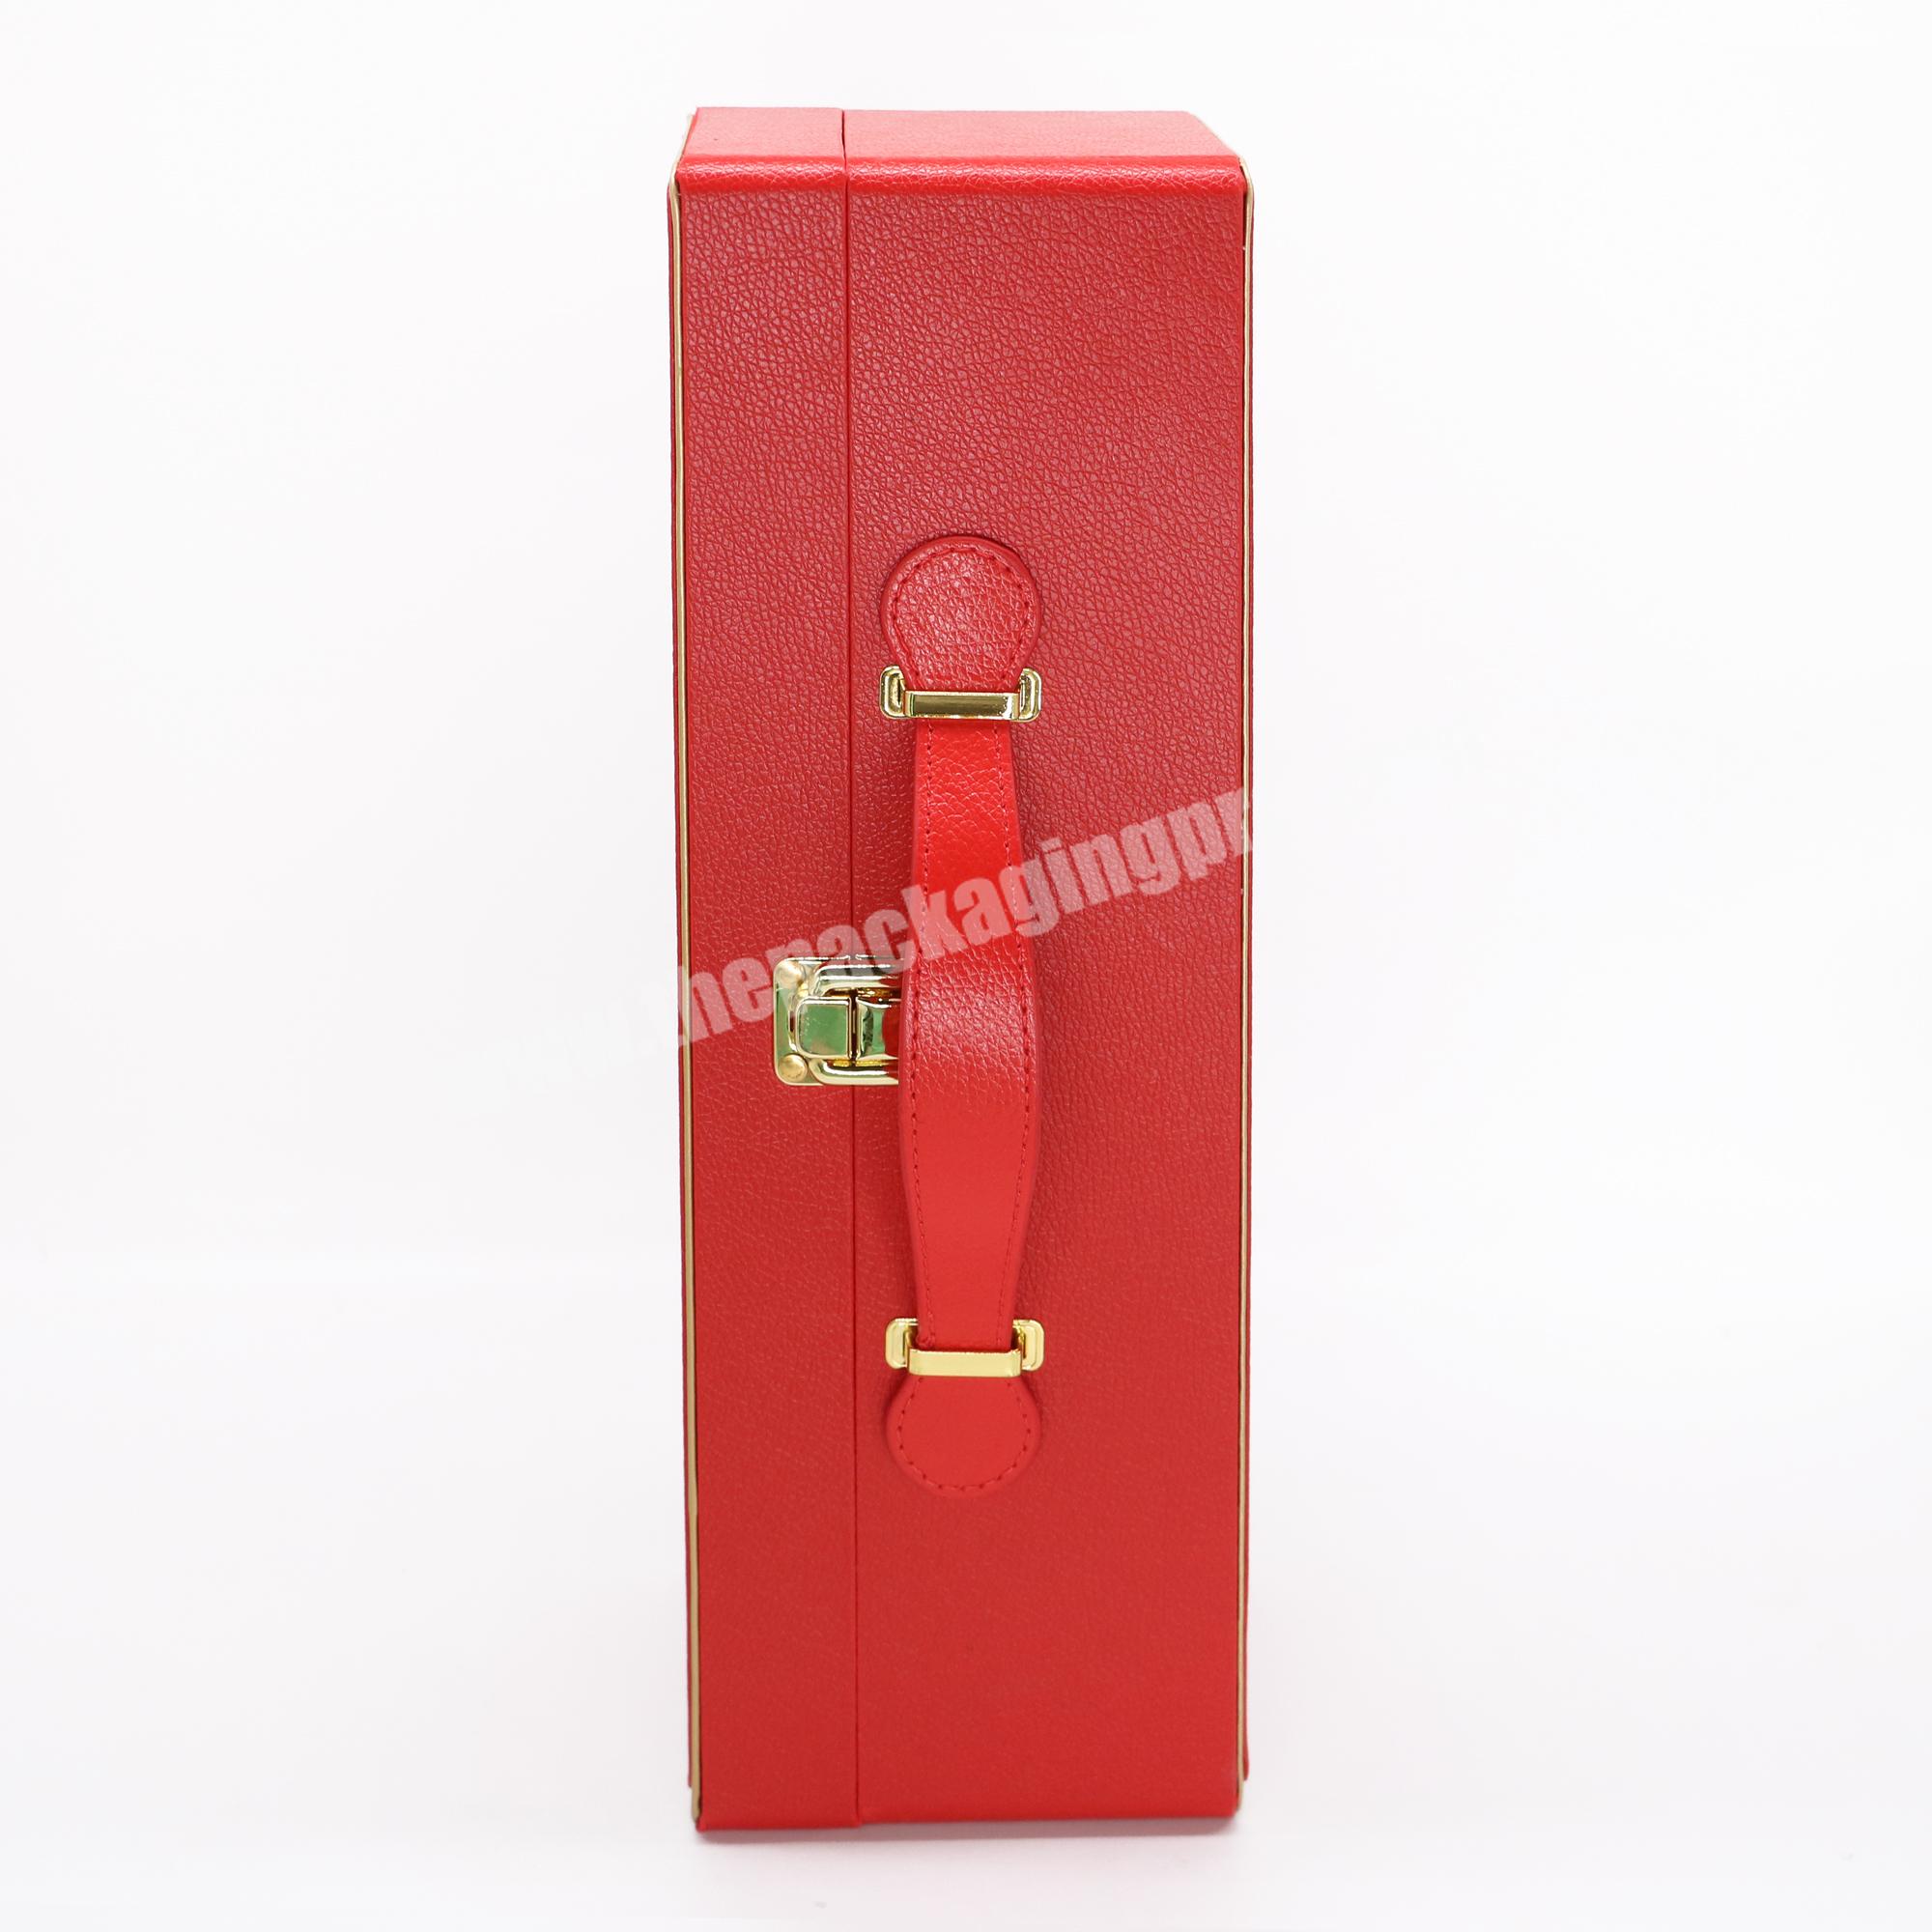 Wooden red wine bottle gift packing box wooden boxes for wine bottles white wine boxes